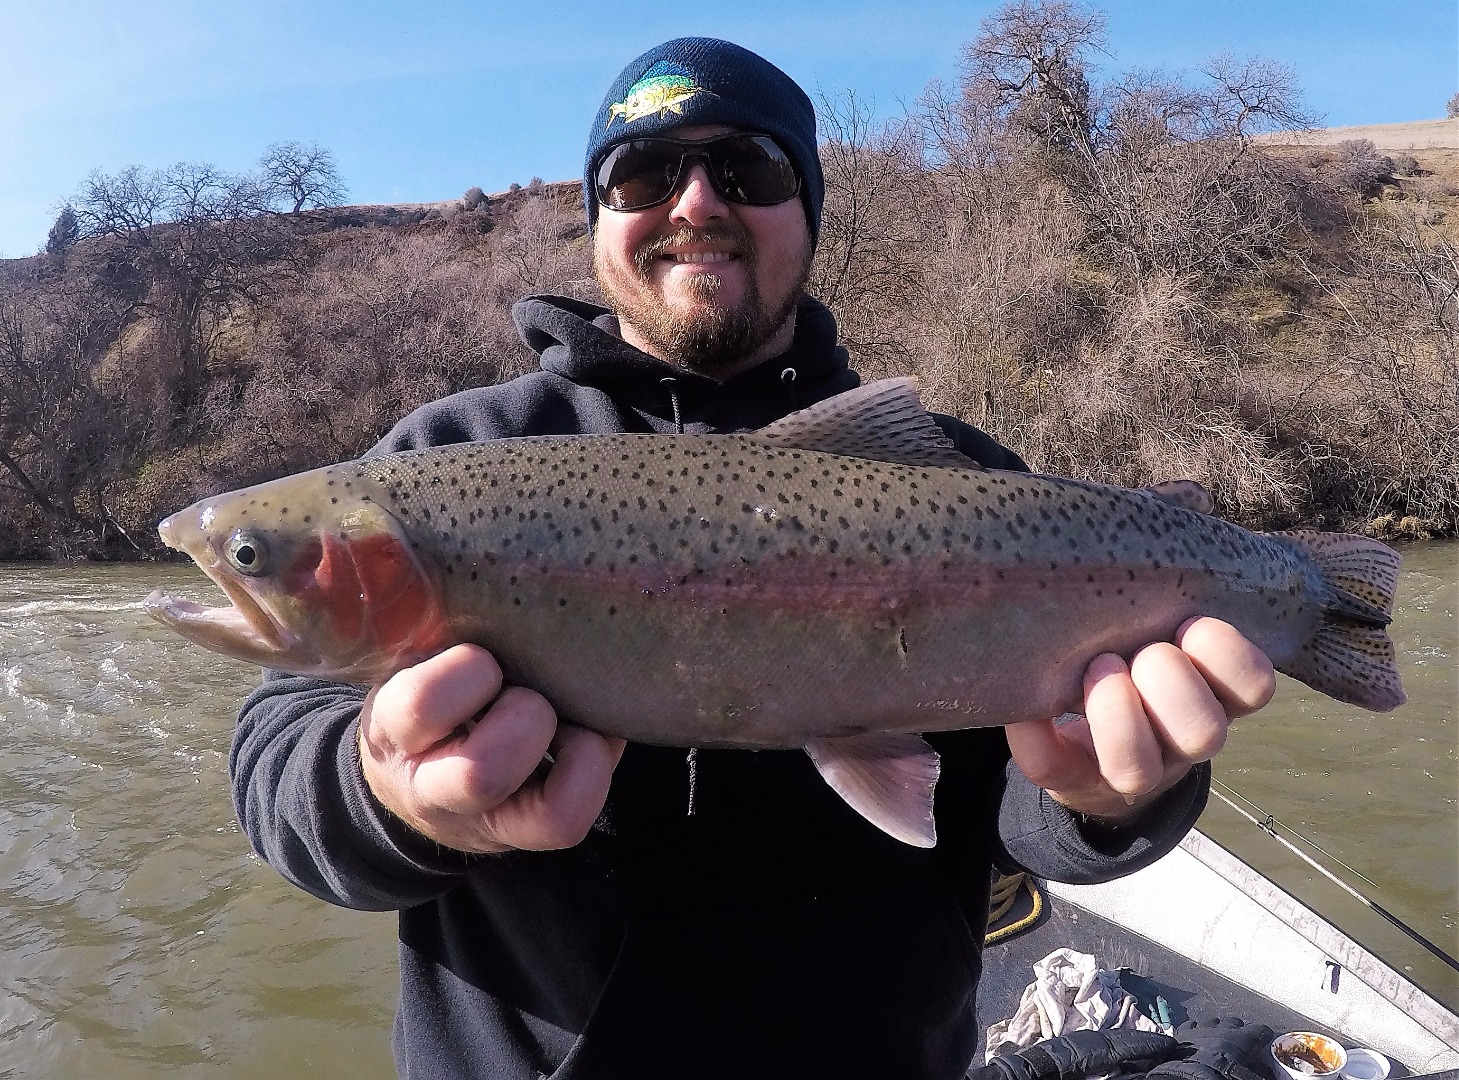 Mother Nature is allowing fishing on Klamath River 